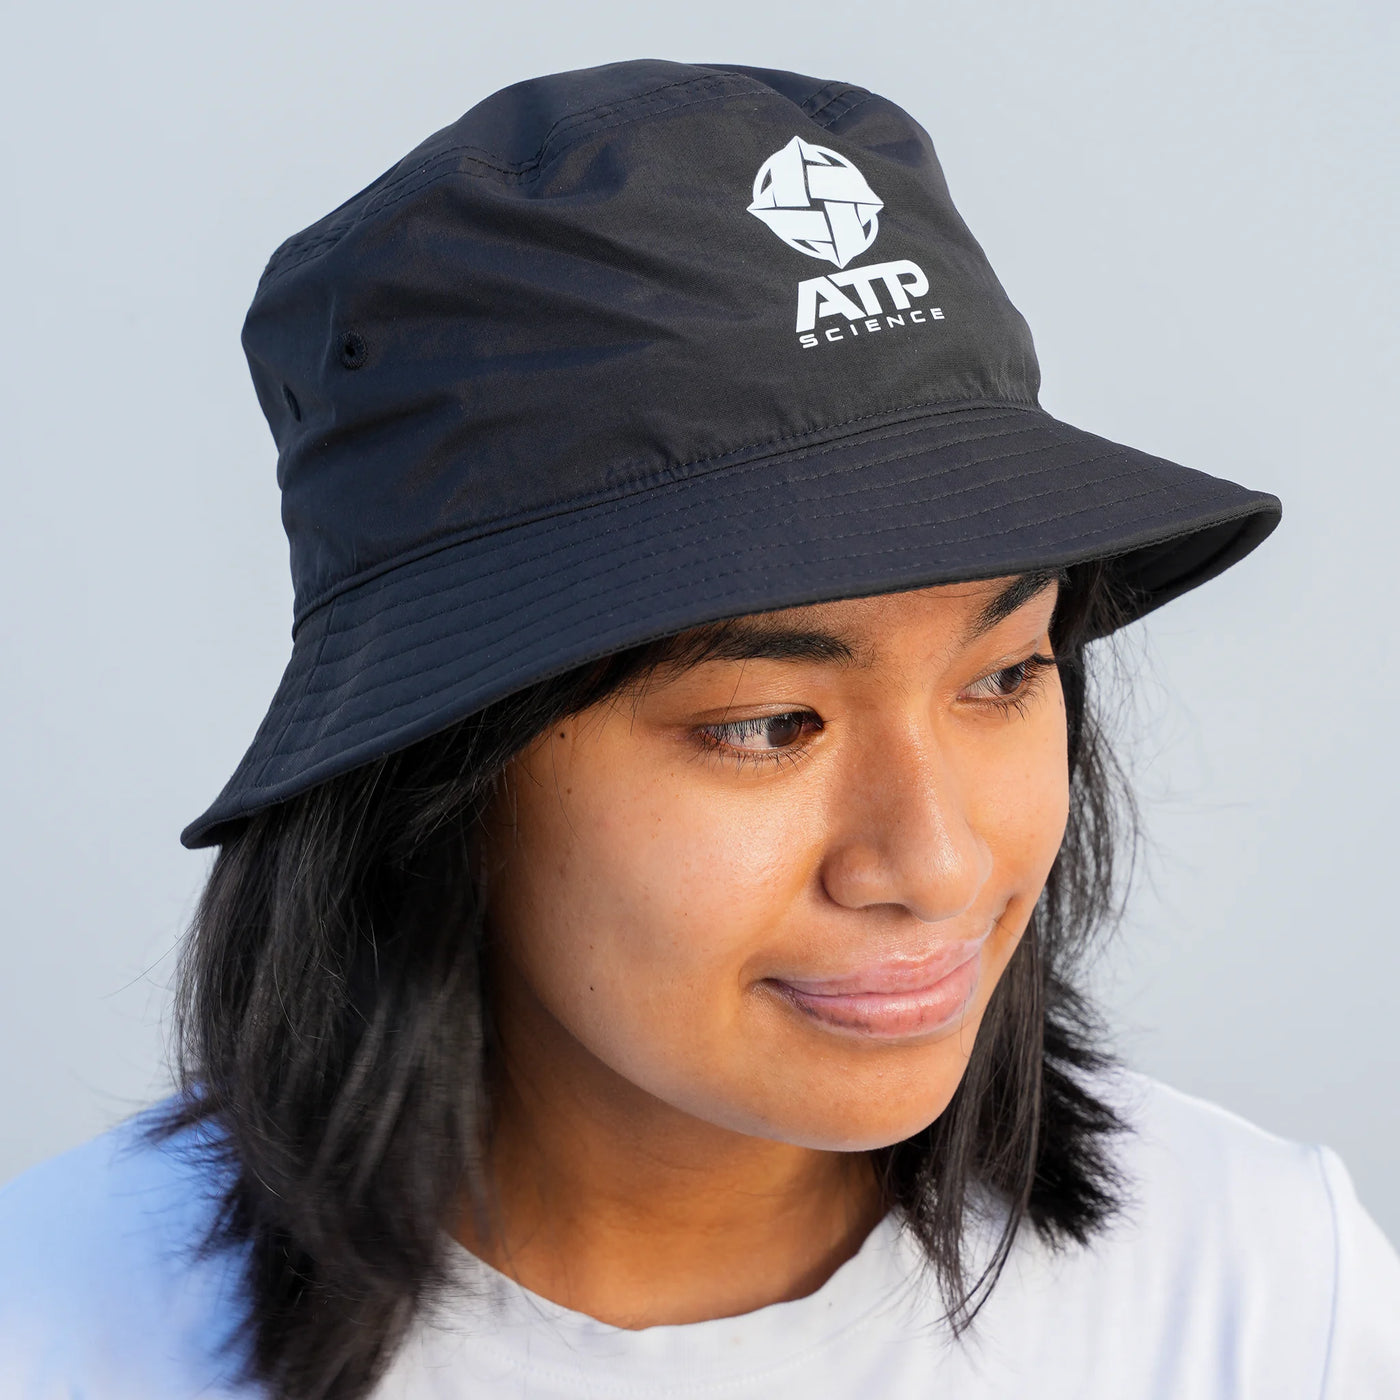 ATP Science Limited Edition Bucket Hat - Black